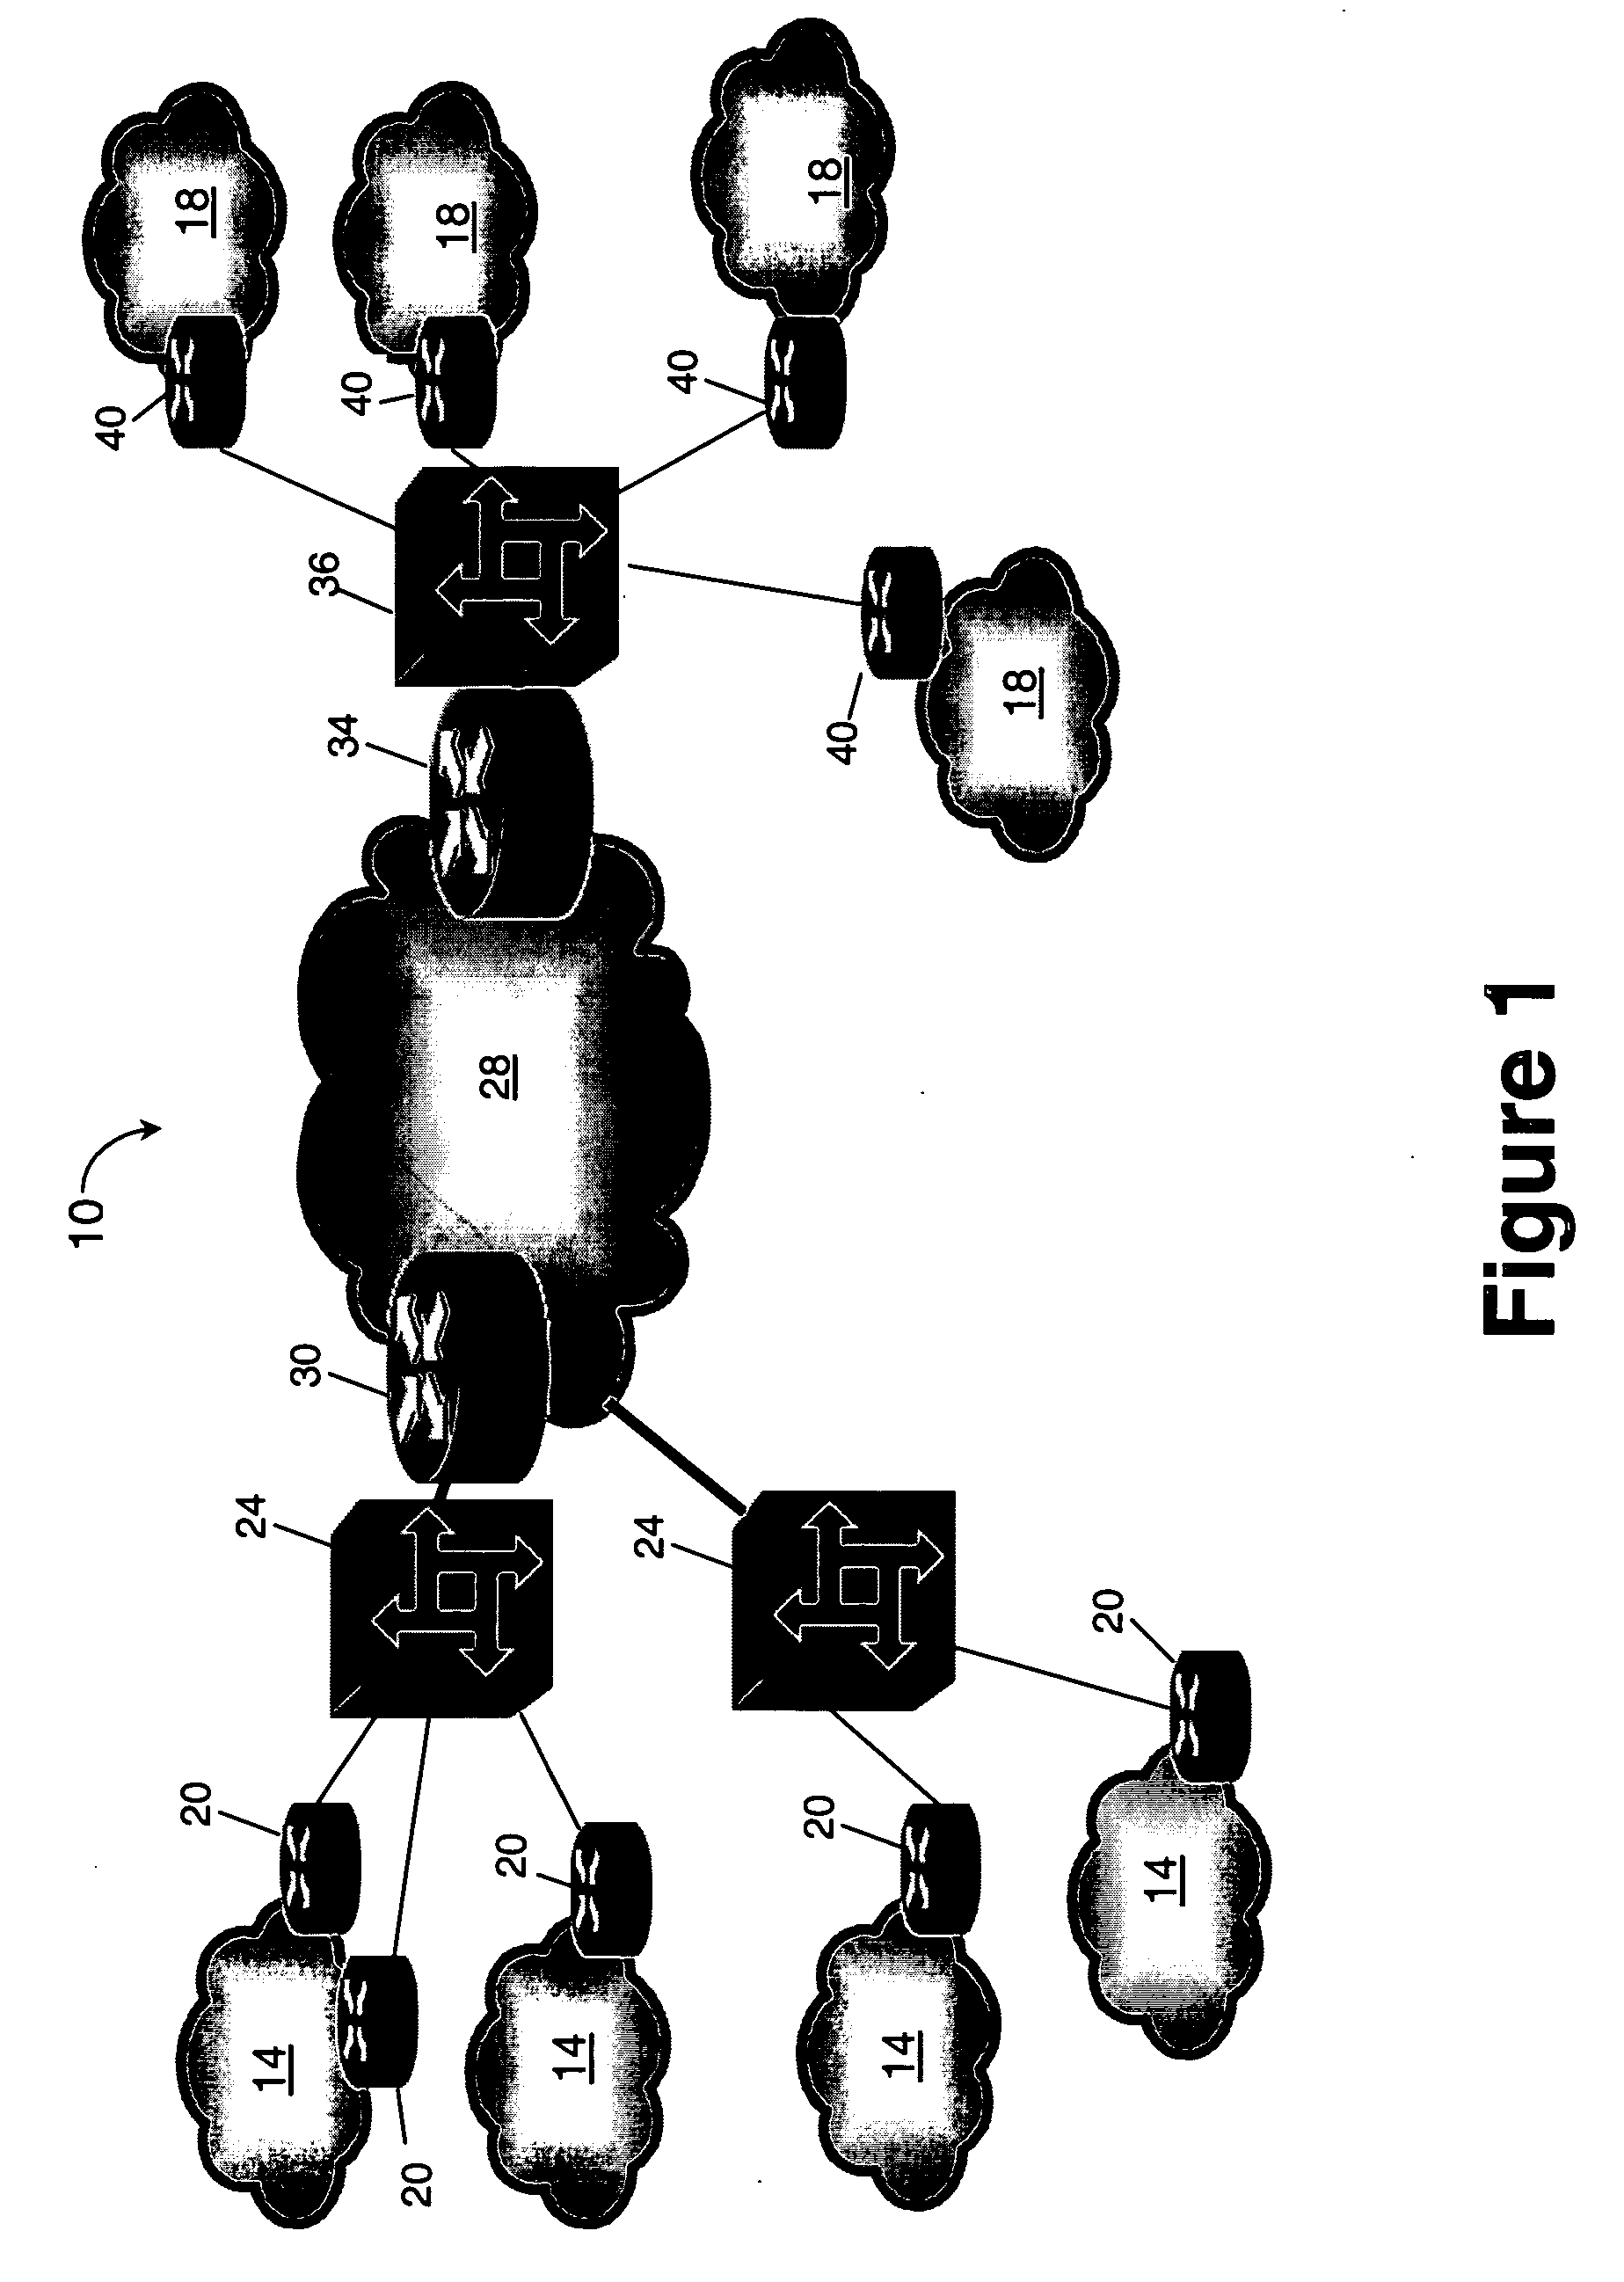 Apparatus and method for layer-2 and layer-3 VPN discovery